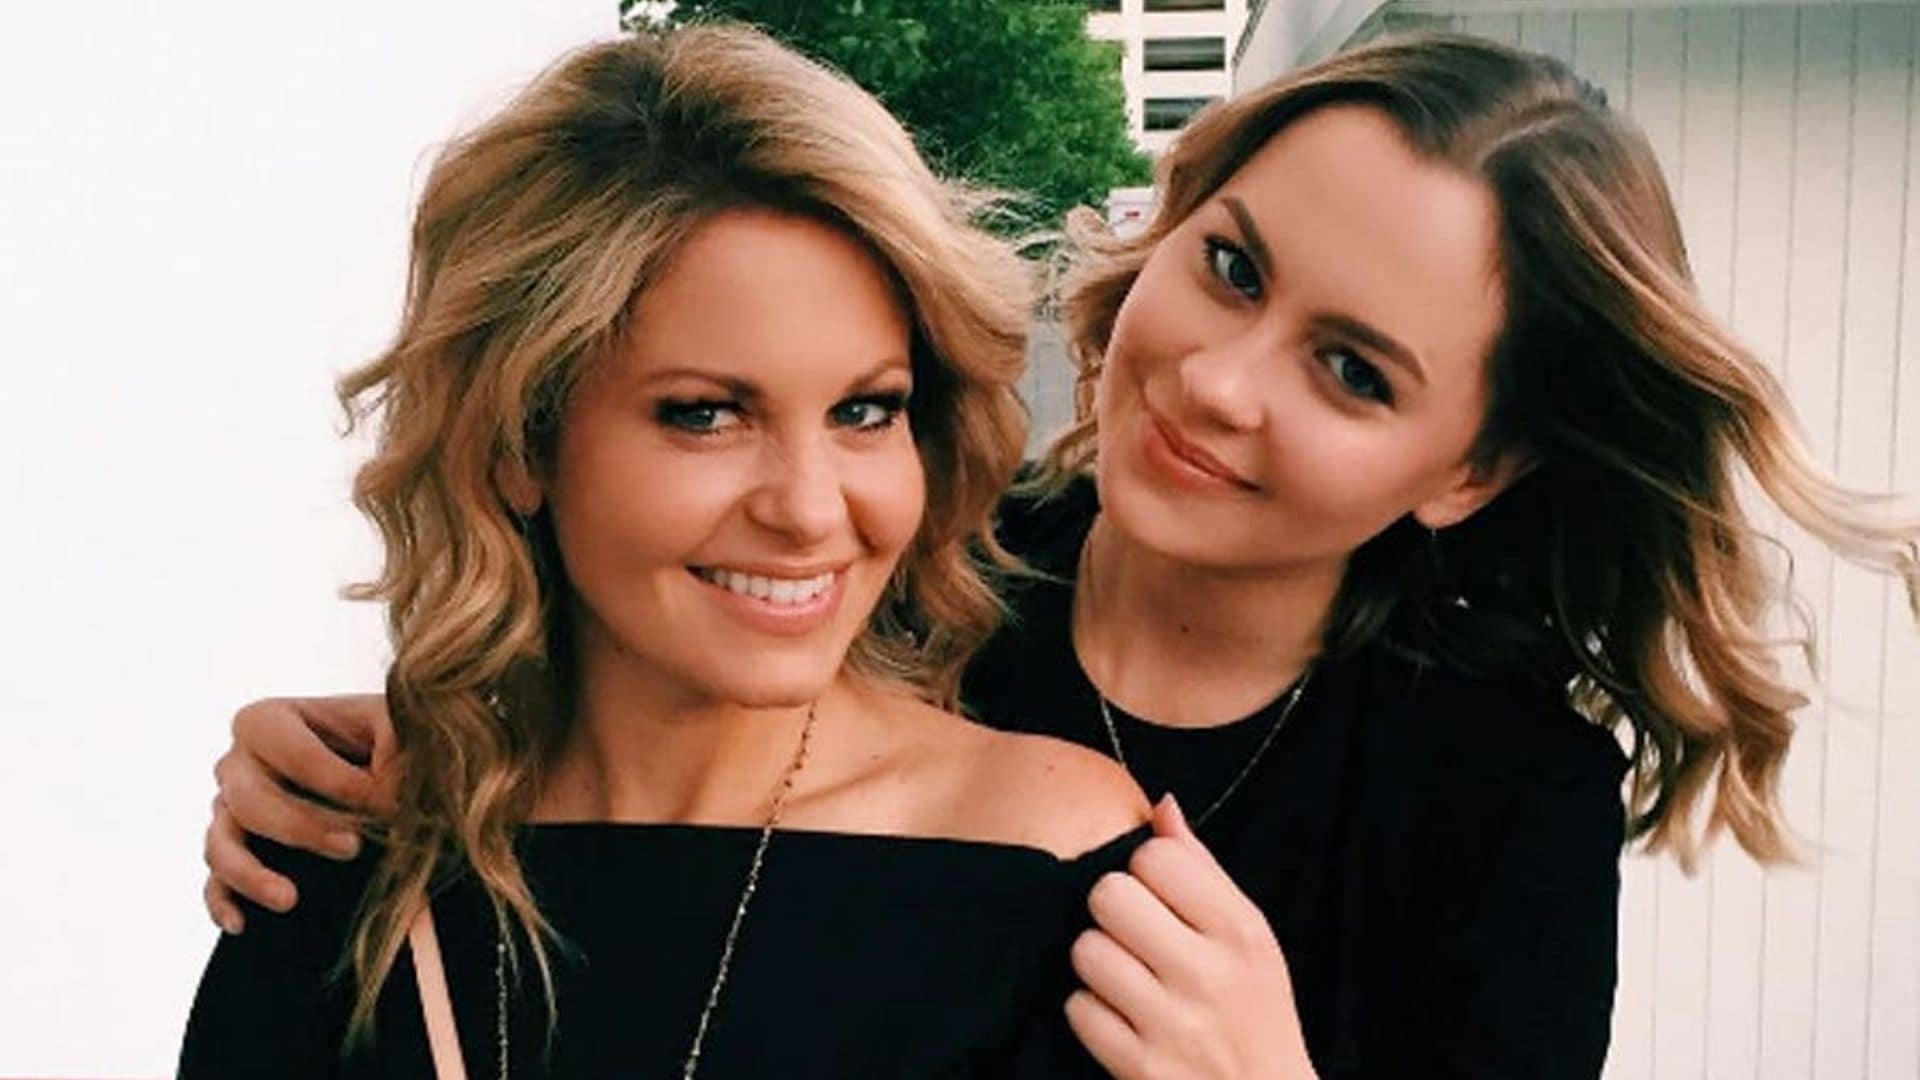 Candace Cameron Bure is a 'proud mama' as daughter is headed to 'The Voice'